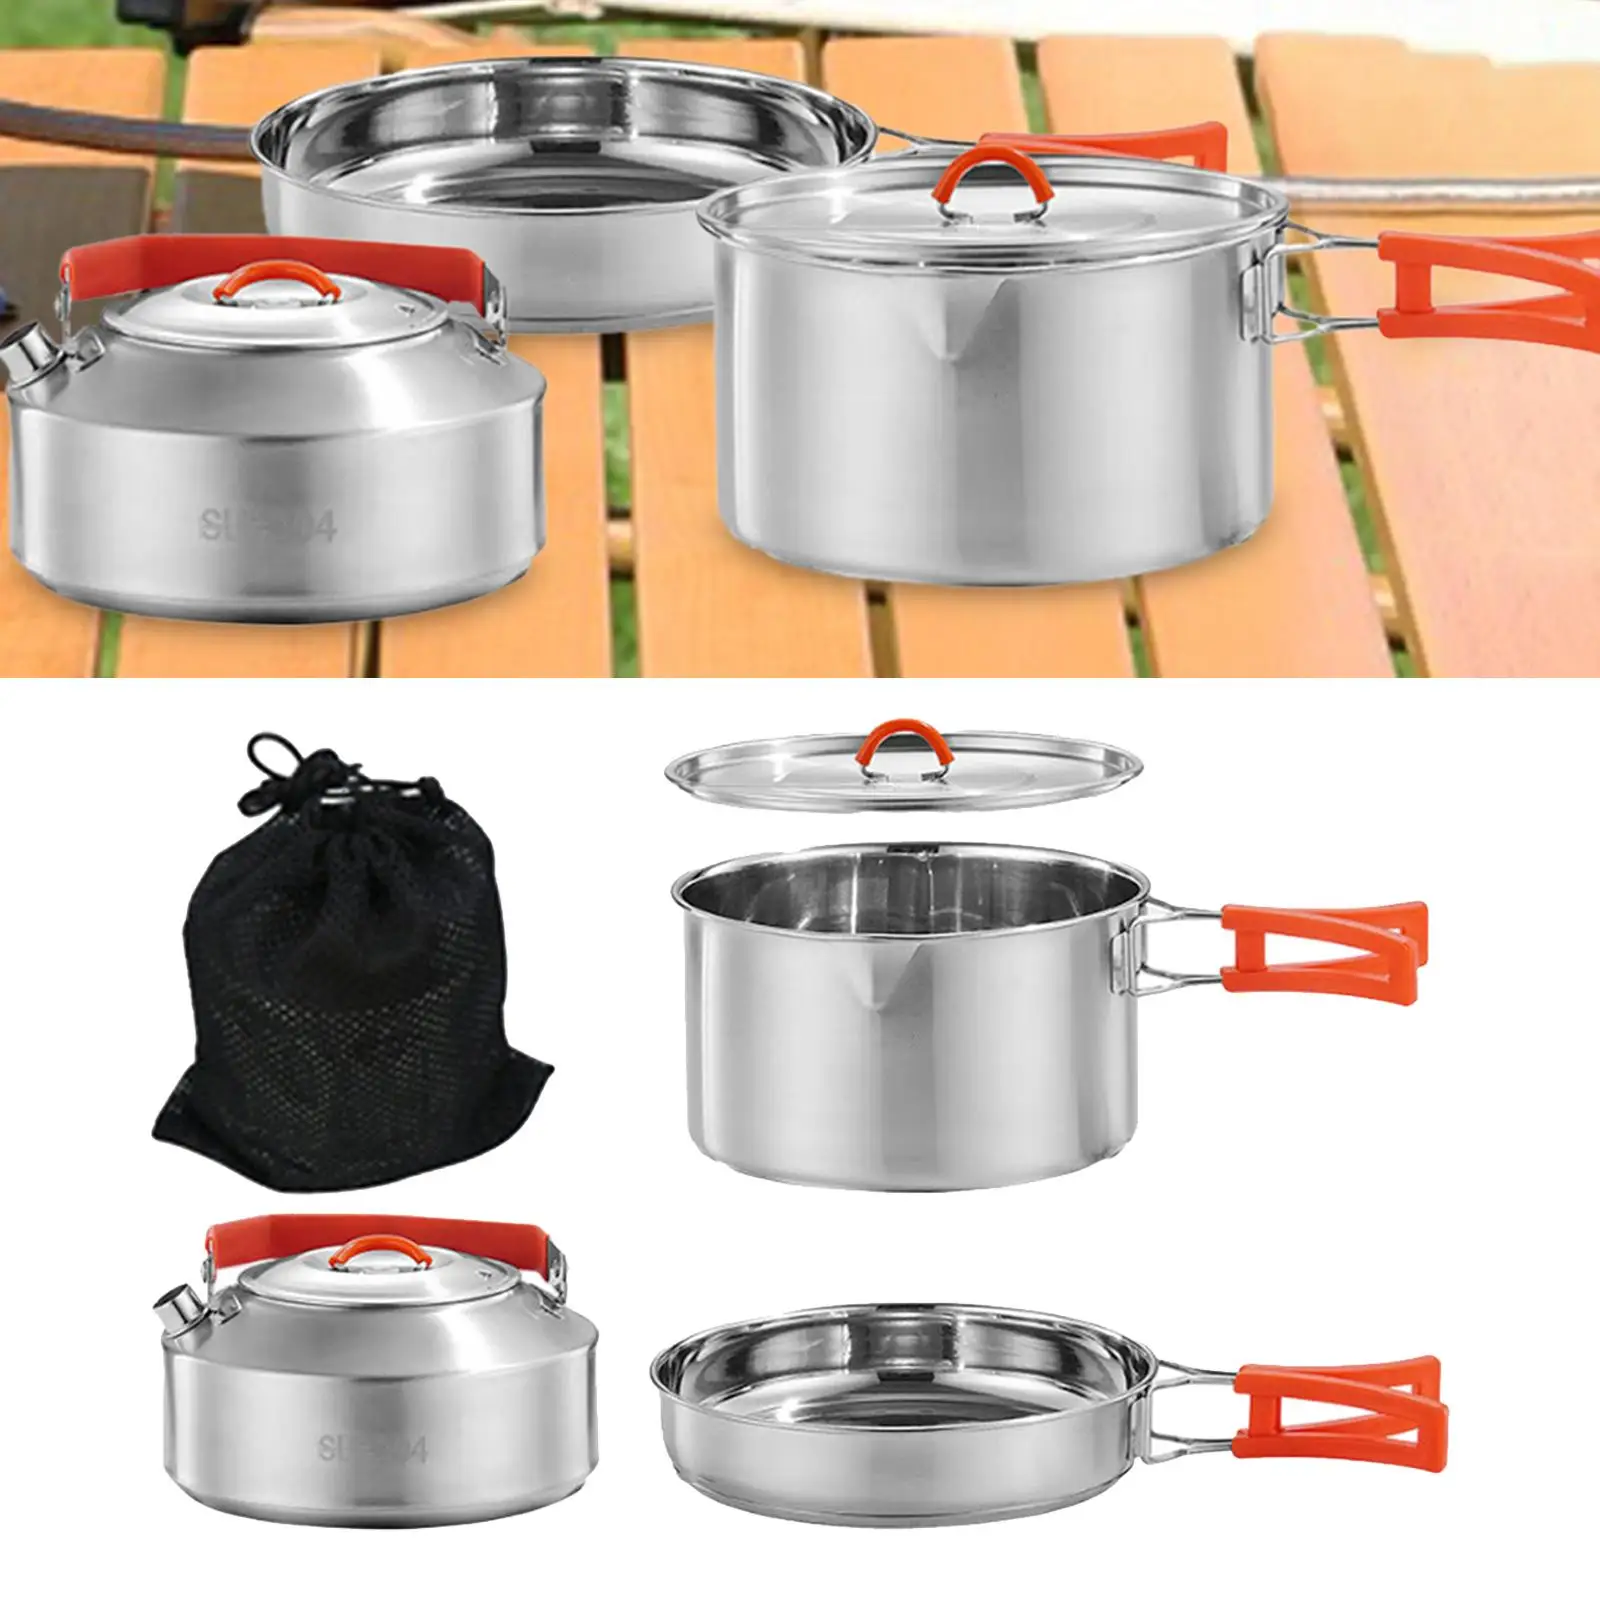 Camping Cookware Easy to Clean for Campfire Camping Pot and Pan Set for Camp